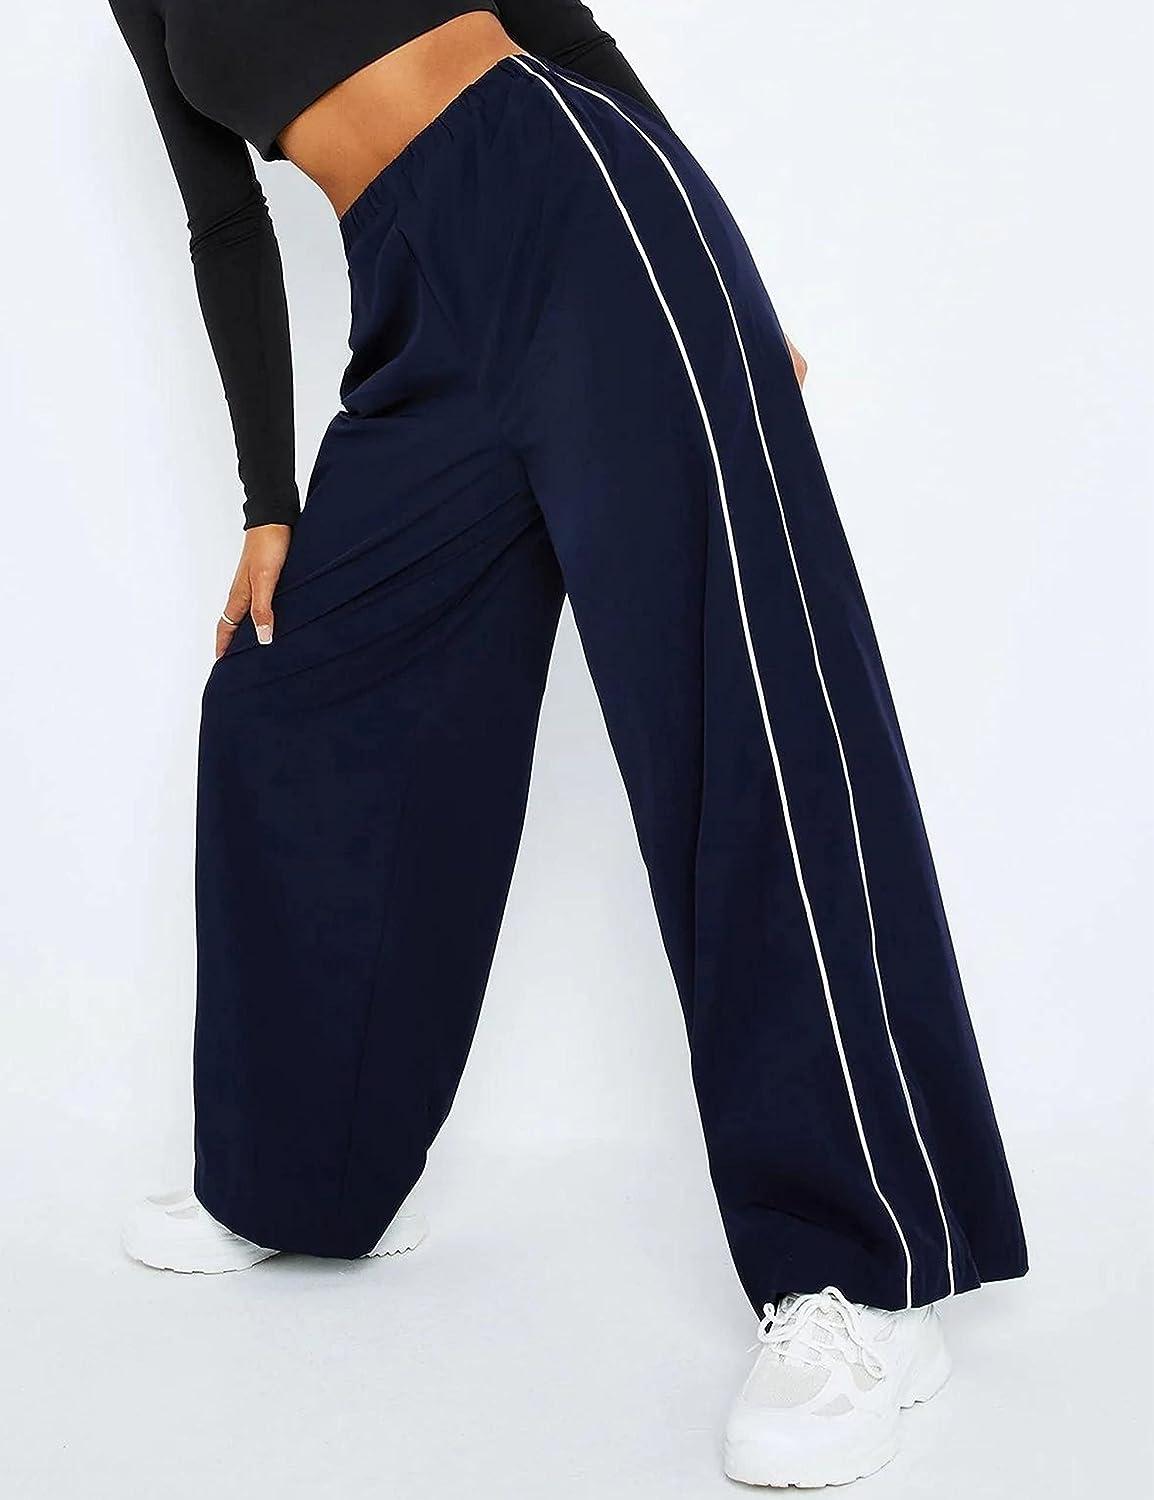 Buy Navy Blue Track Pants for Women by Outryt Sport Online | Ajio.com